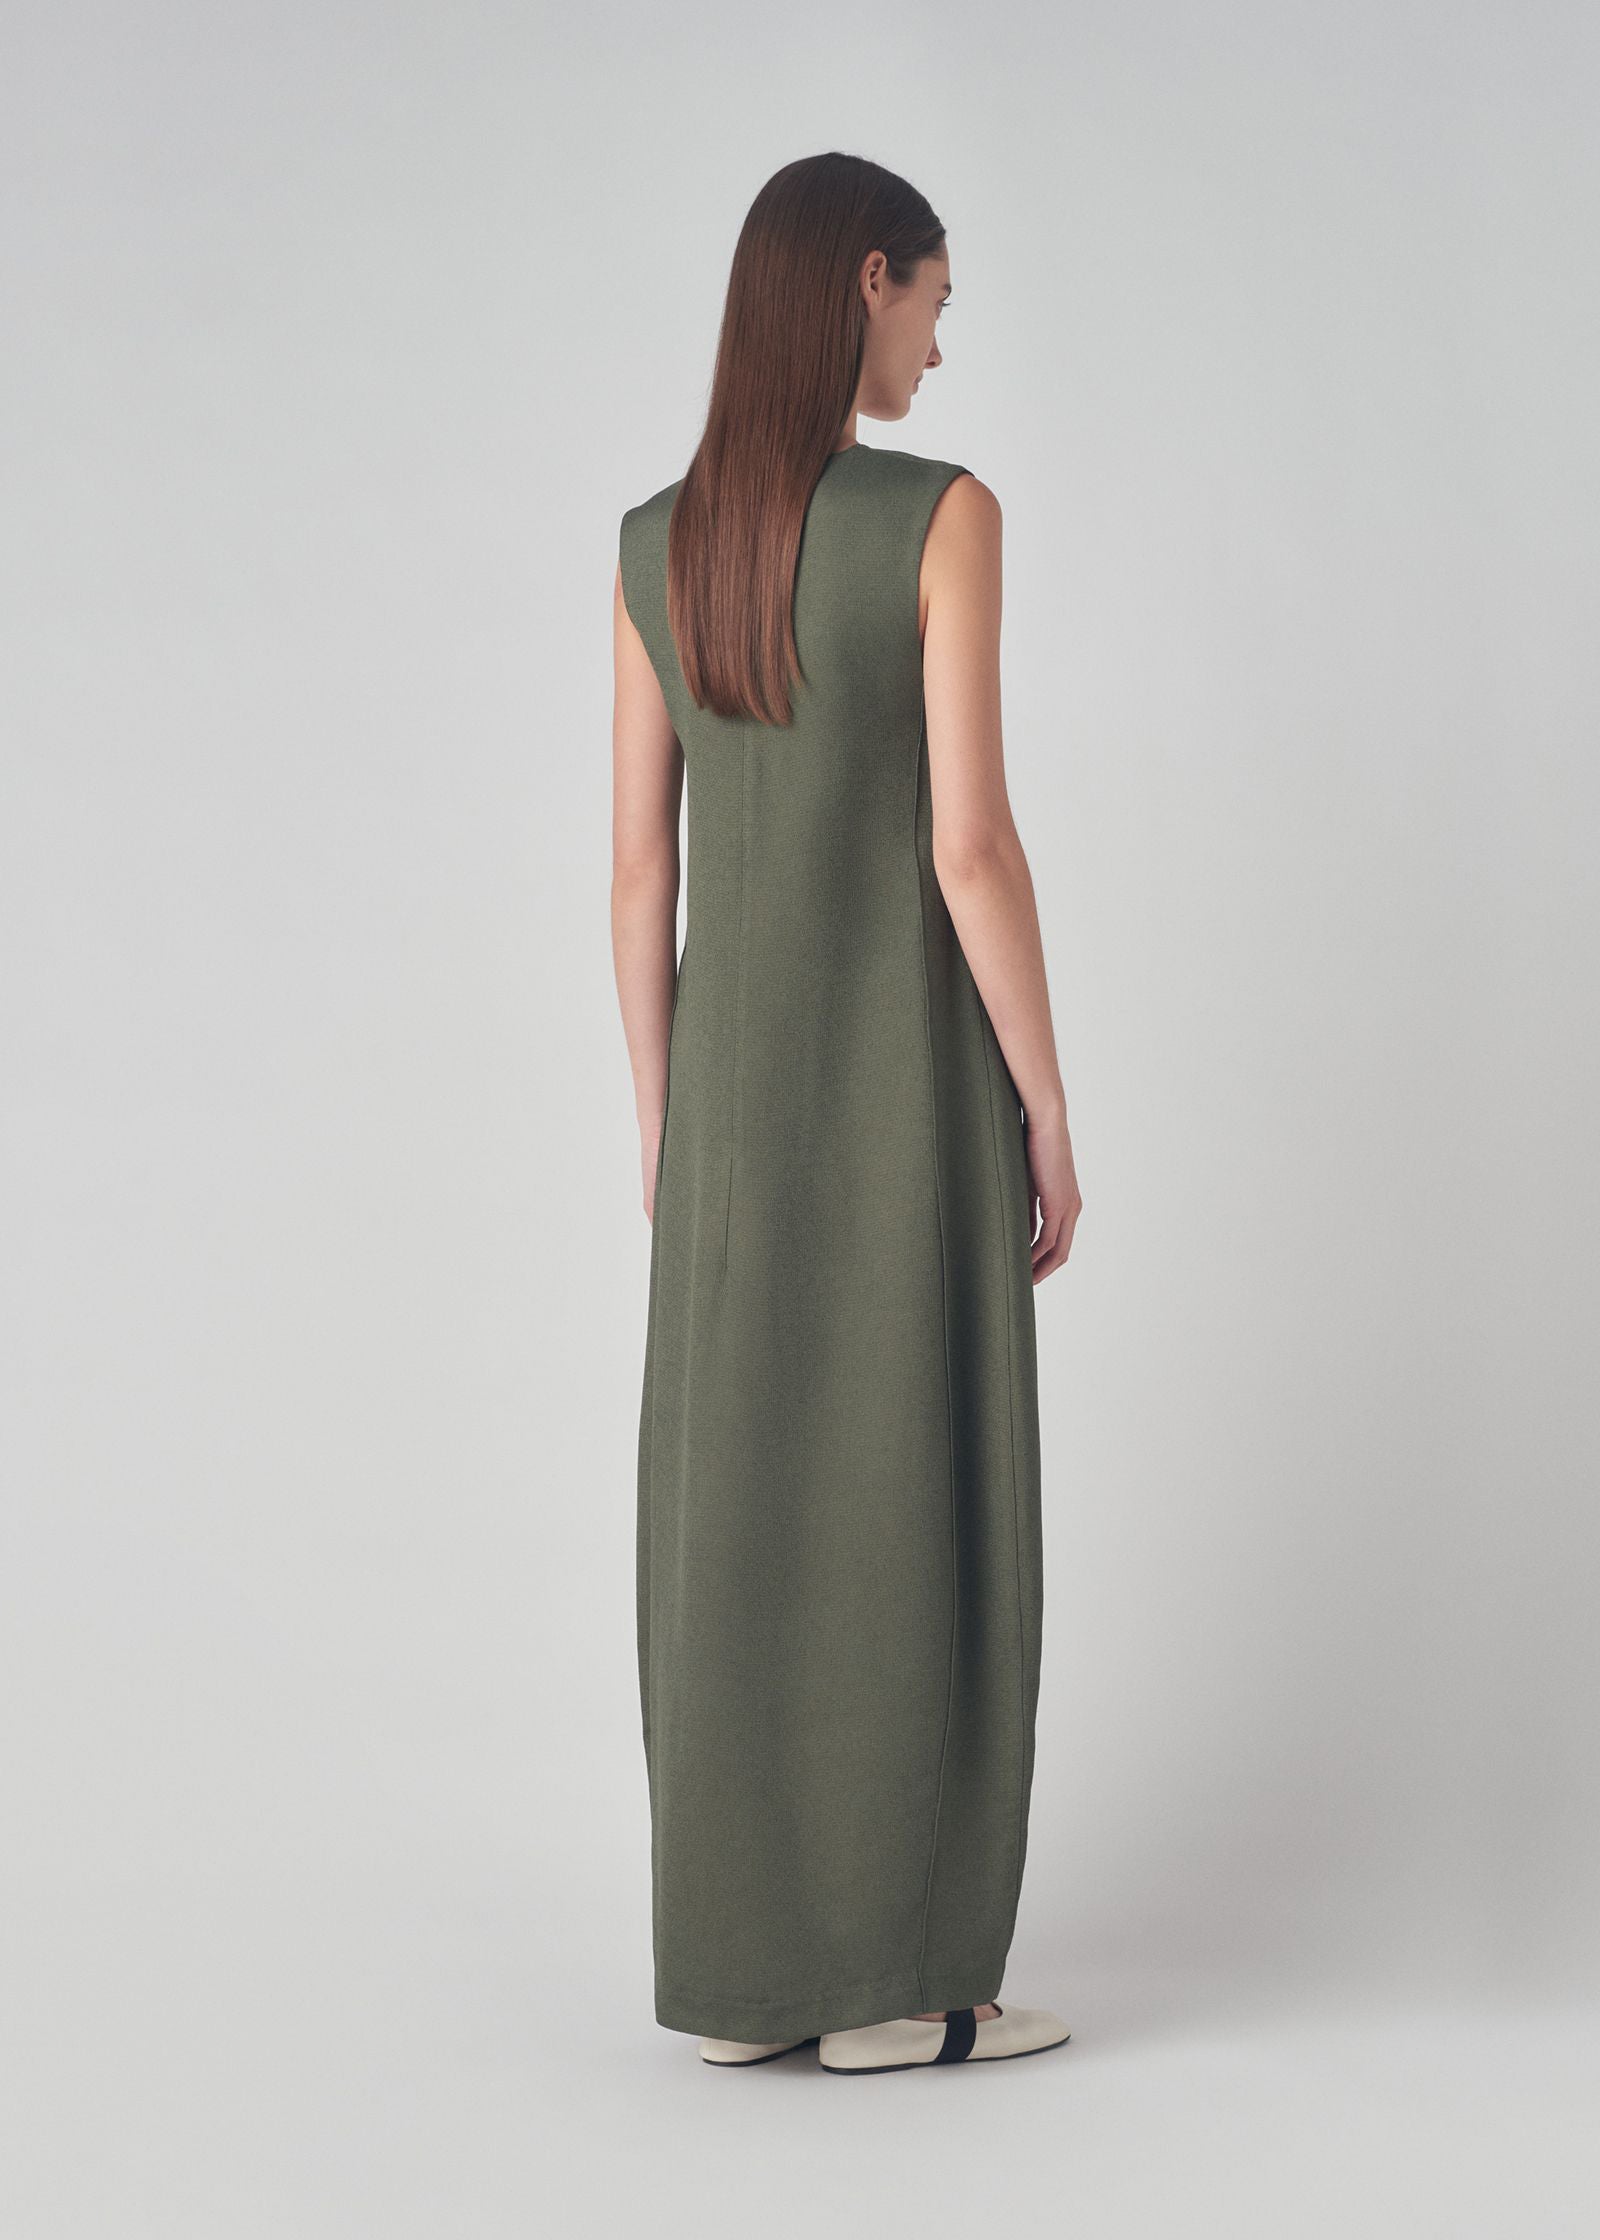 Sleeveless V Neck Shift Dress in Viscose Crepe - Green - CO Collections